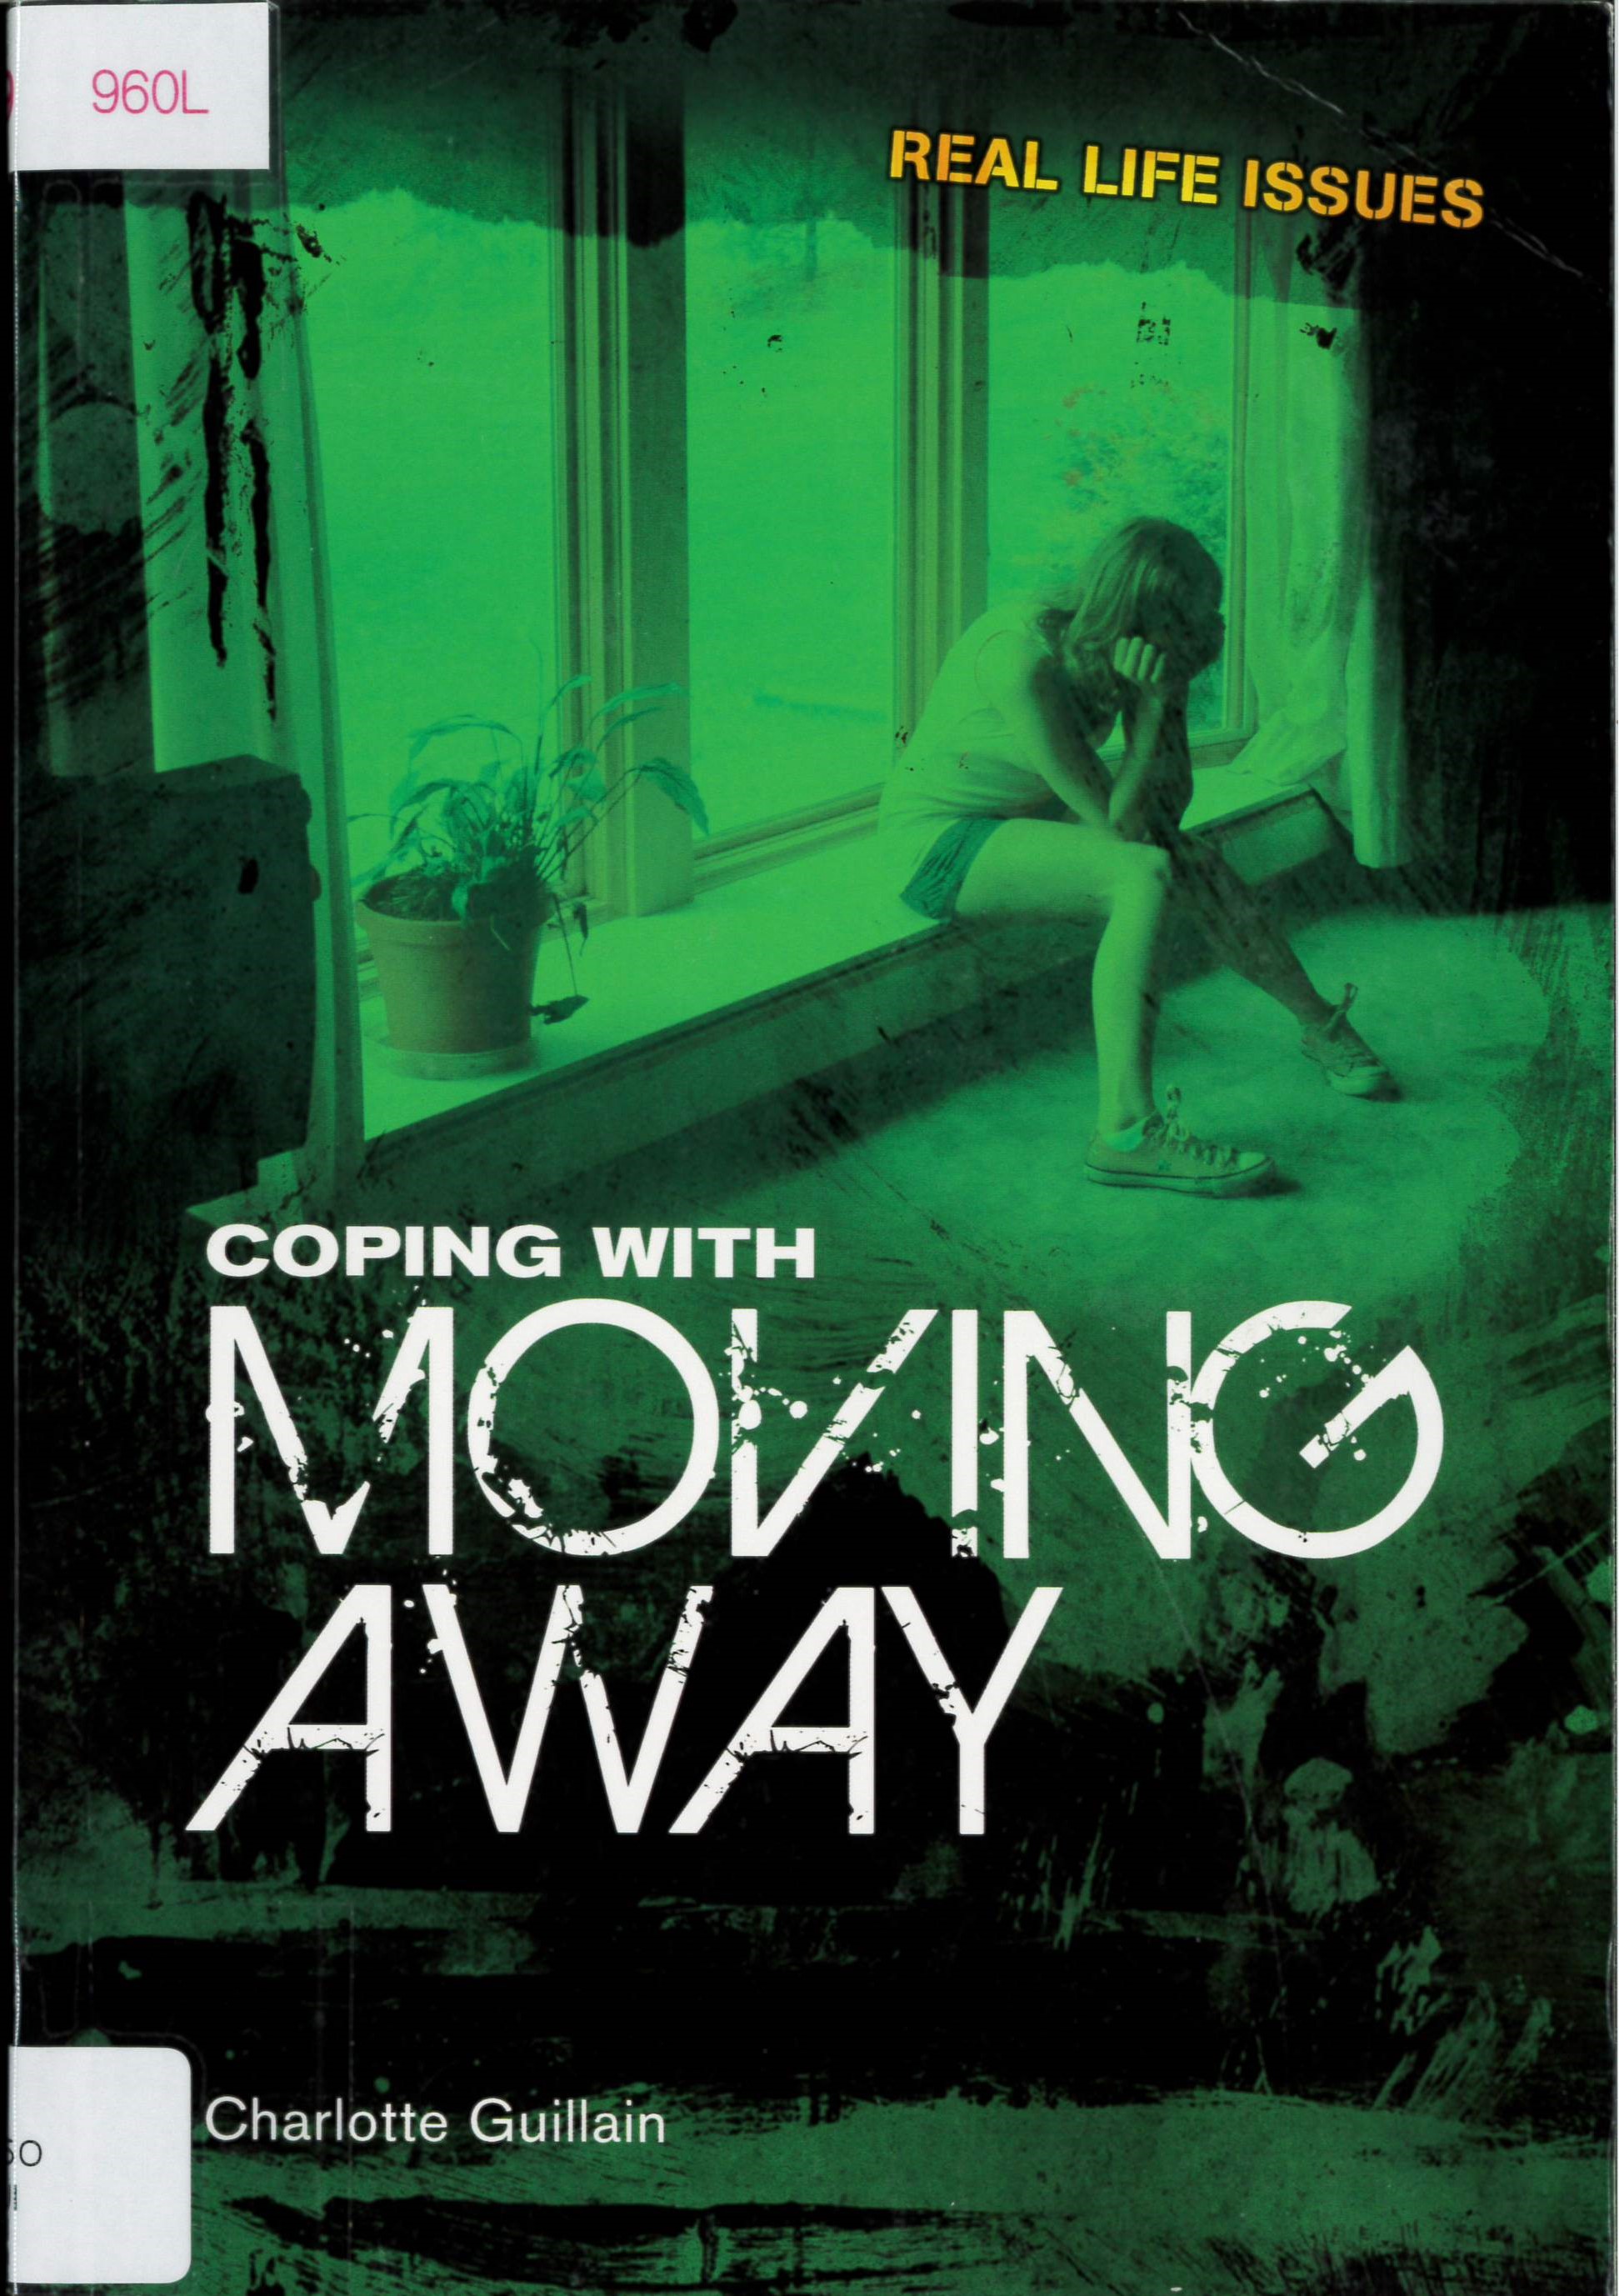 Coping with moving away /